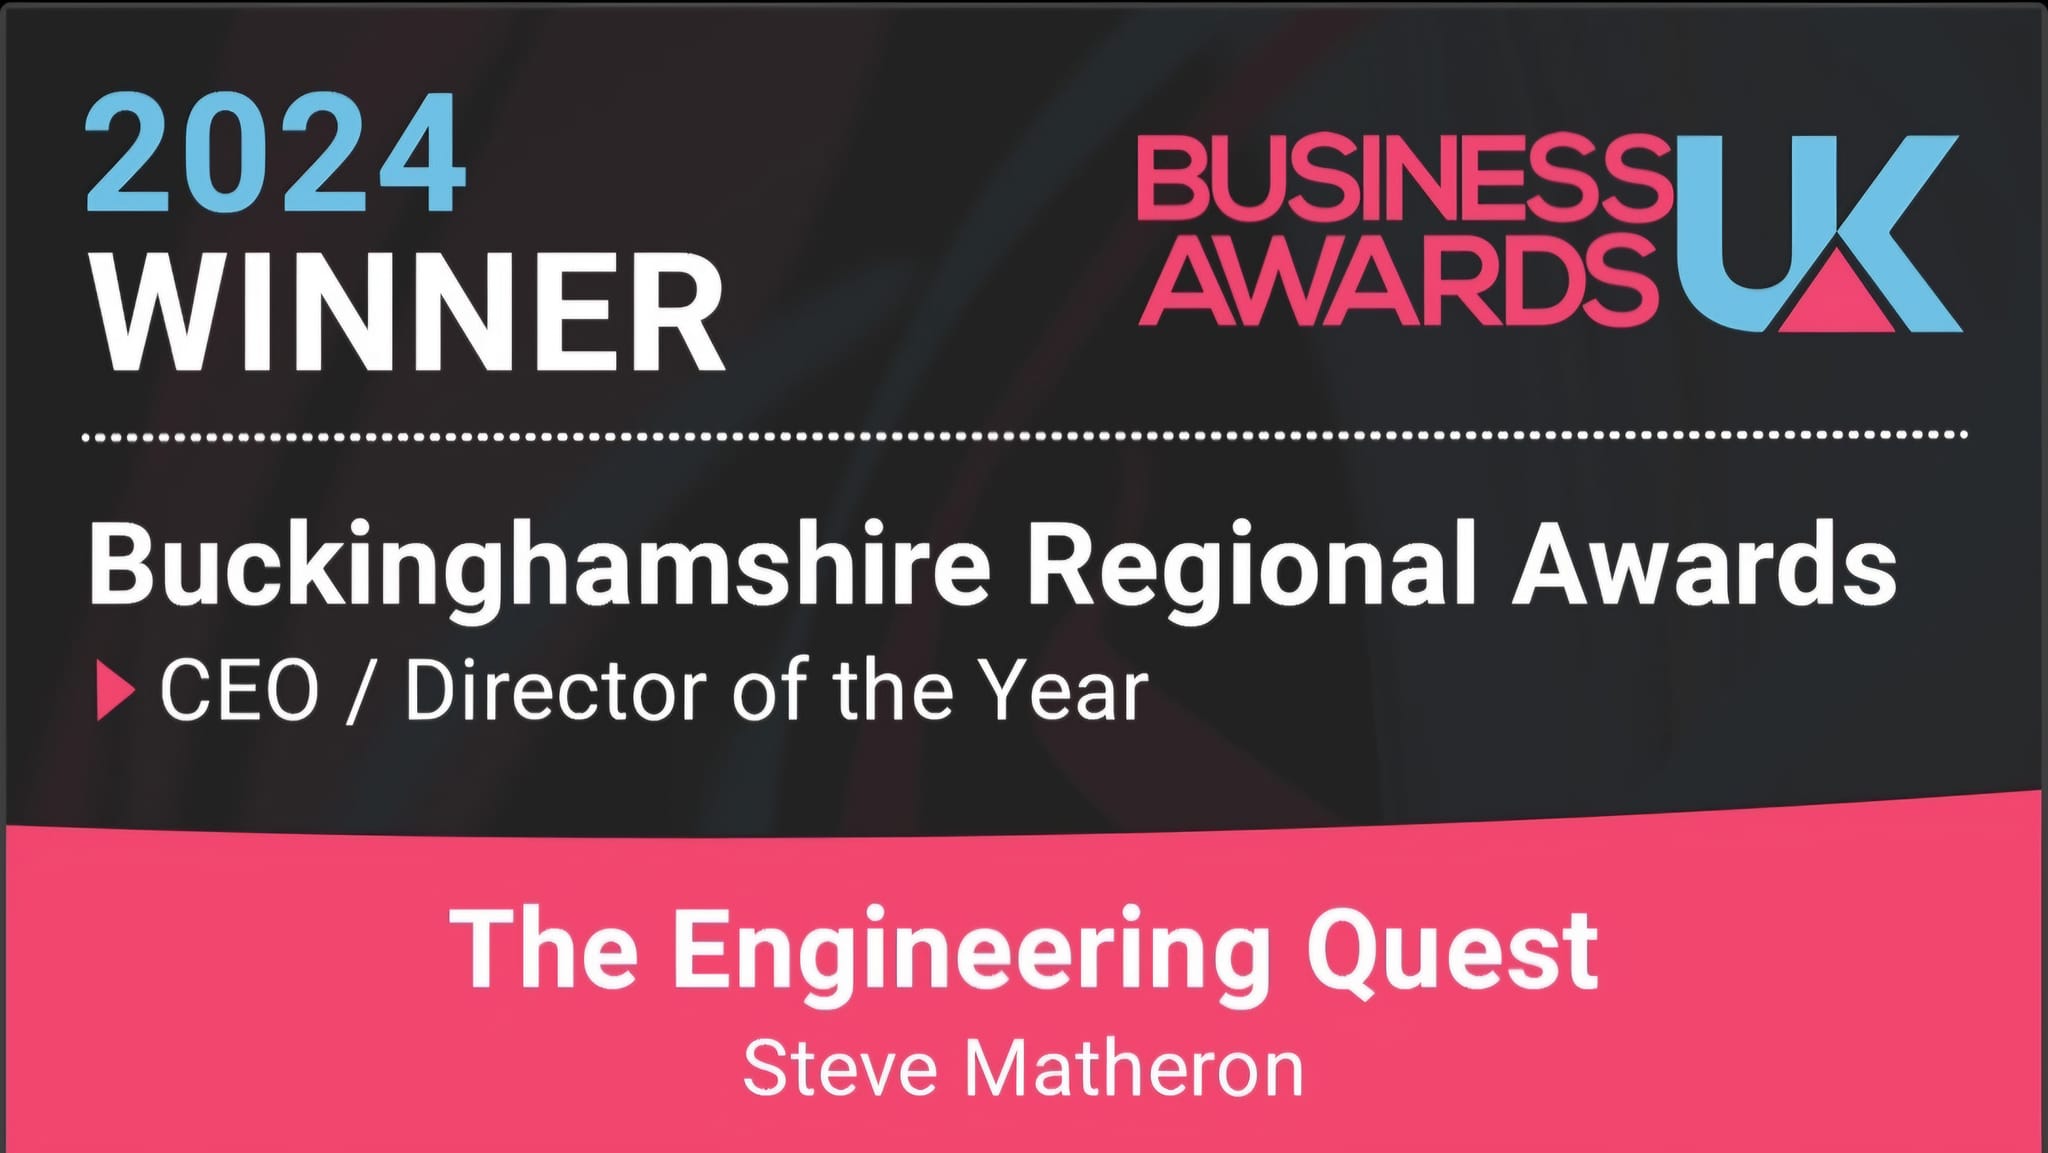 Winner of 2024 Business Awards UK (Regional Awards) - CEO / Director of the Year